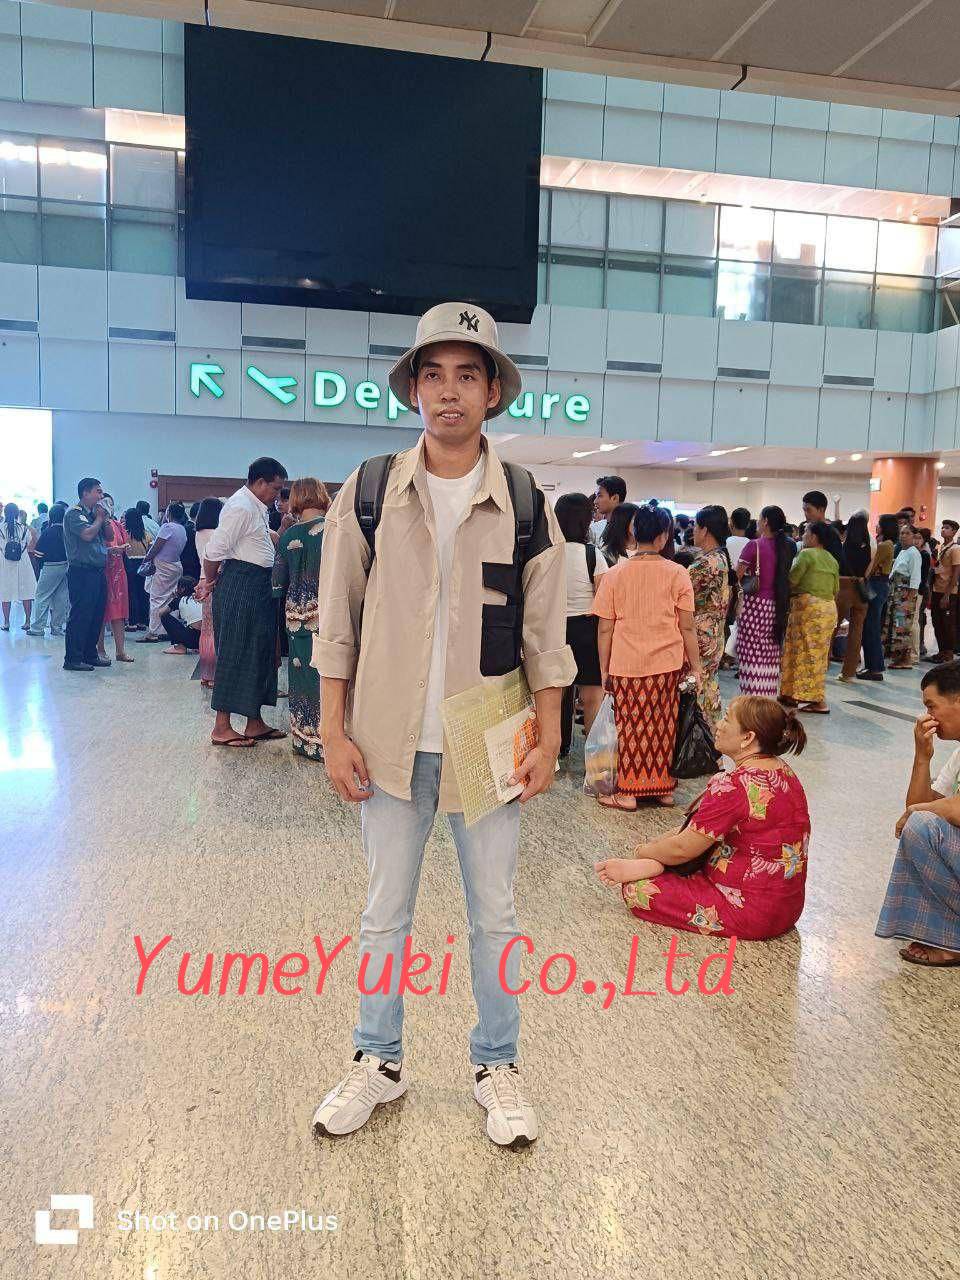 yumeyuki student go to japan as a agriculture worker